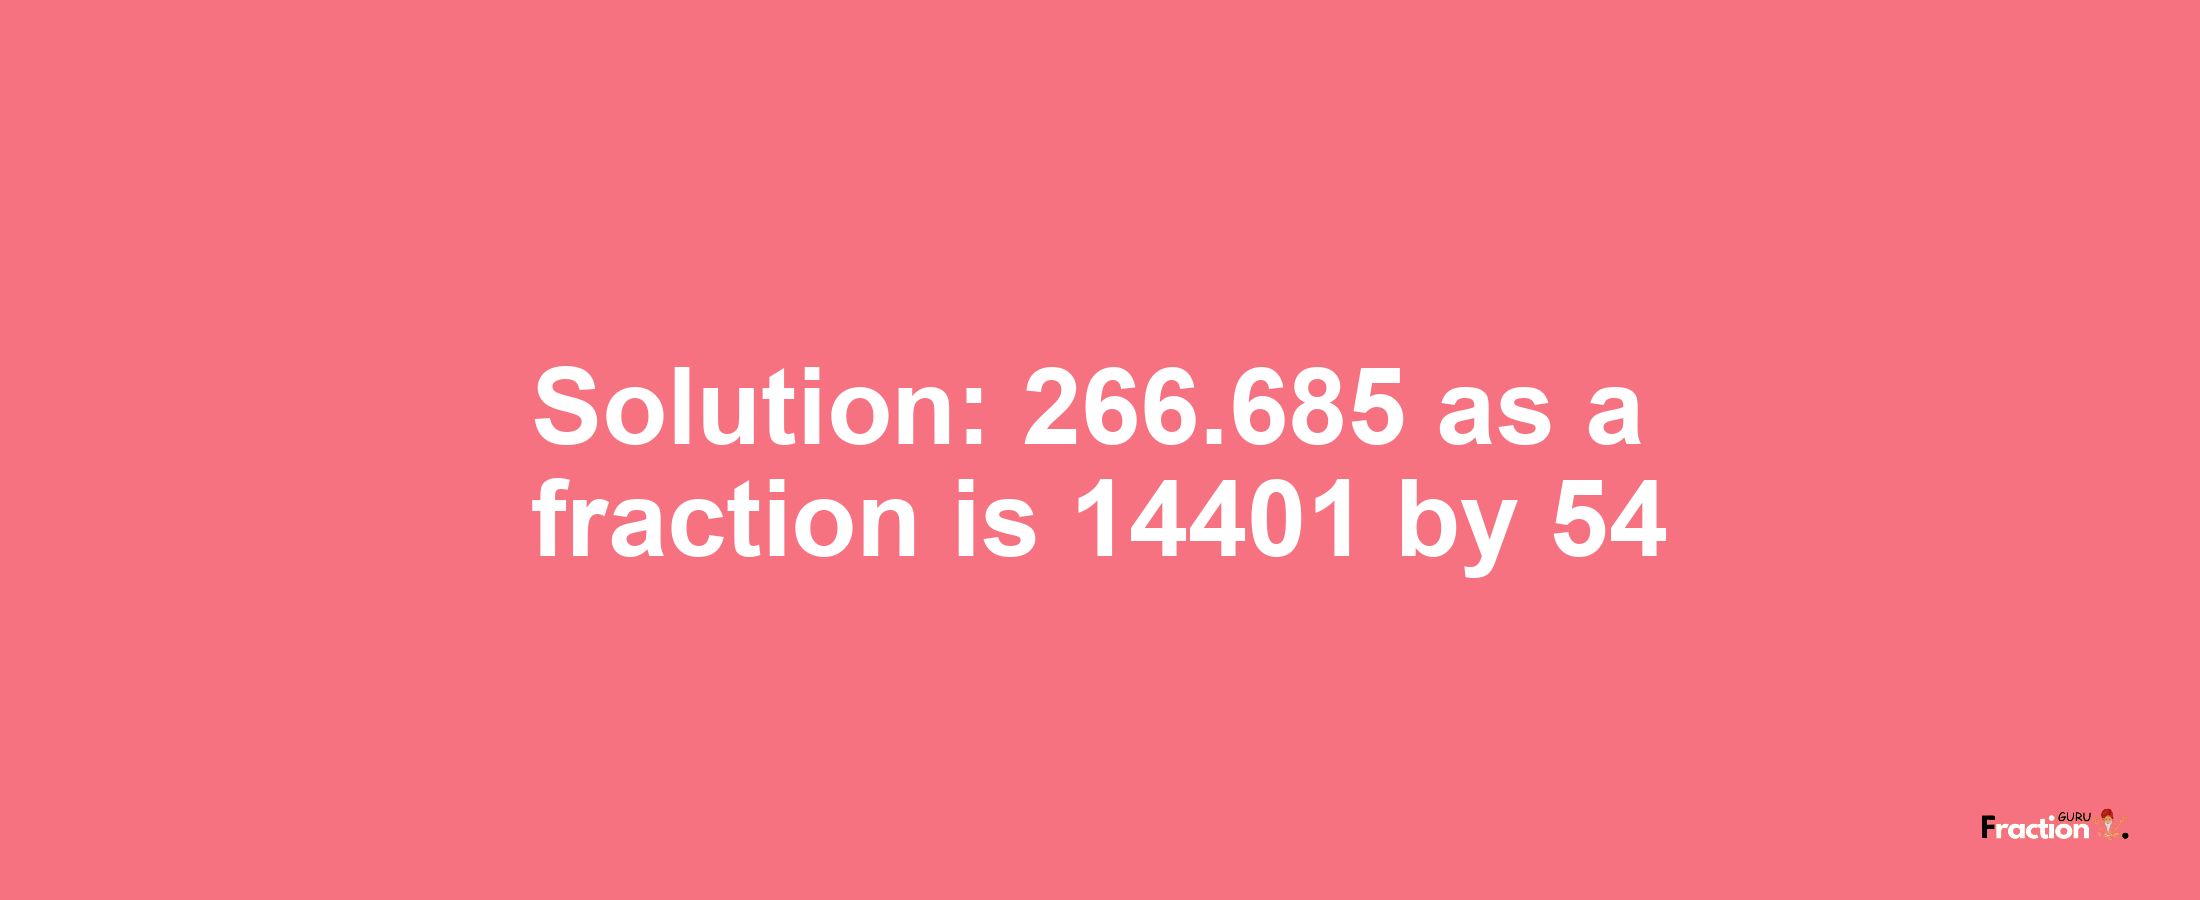 Solution:266.685 as a fraction is 14401/54